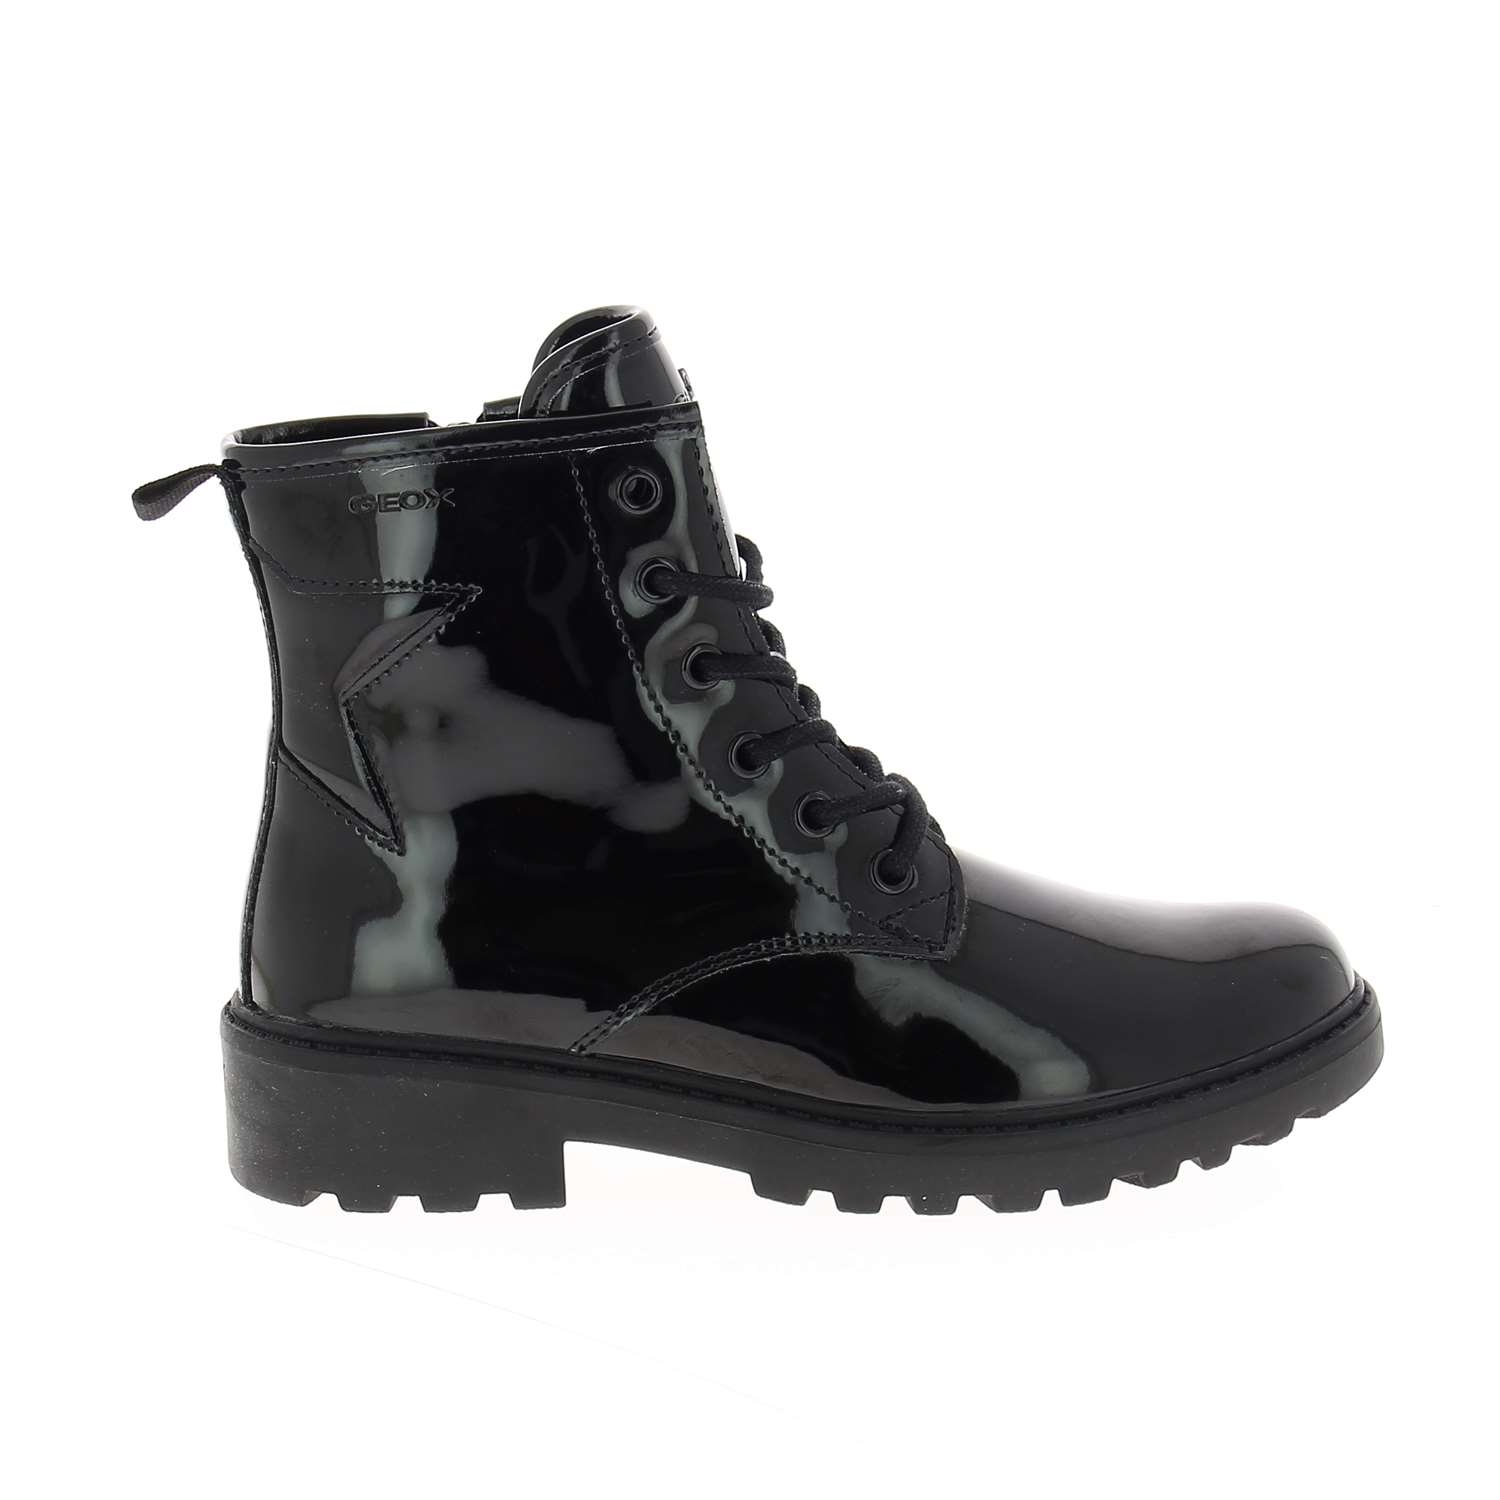 02 - CASEY - GEOX - Boots et bottines - Synthétique